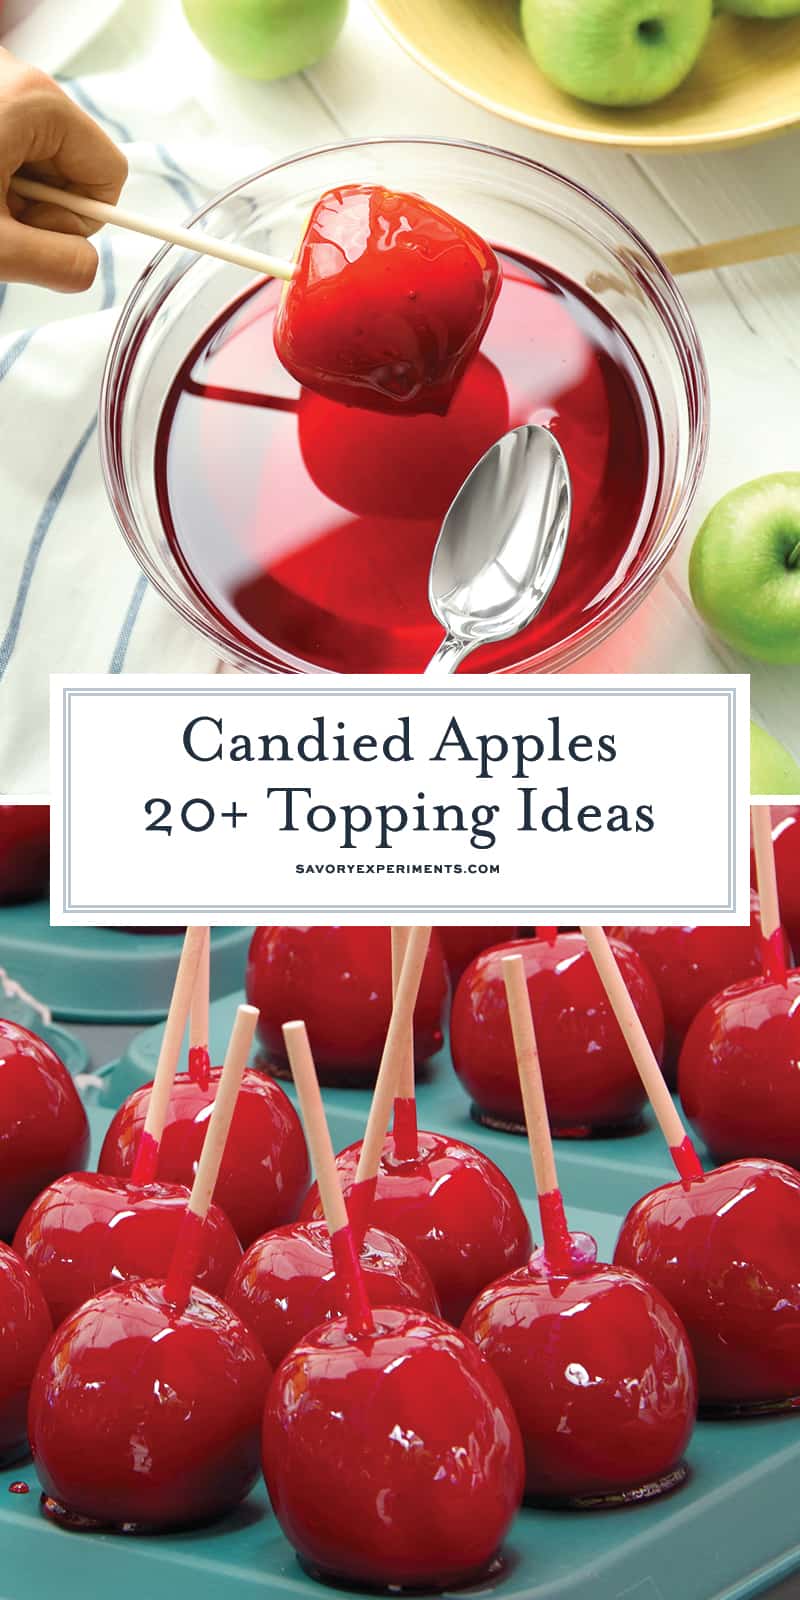 Download 20+ Ideas for Candied Apples | Bright Red Candy Apple Recipe